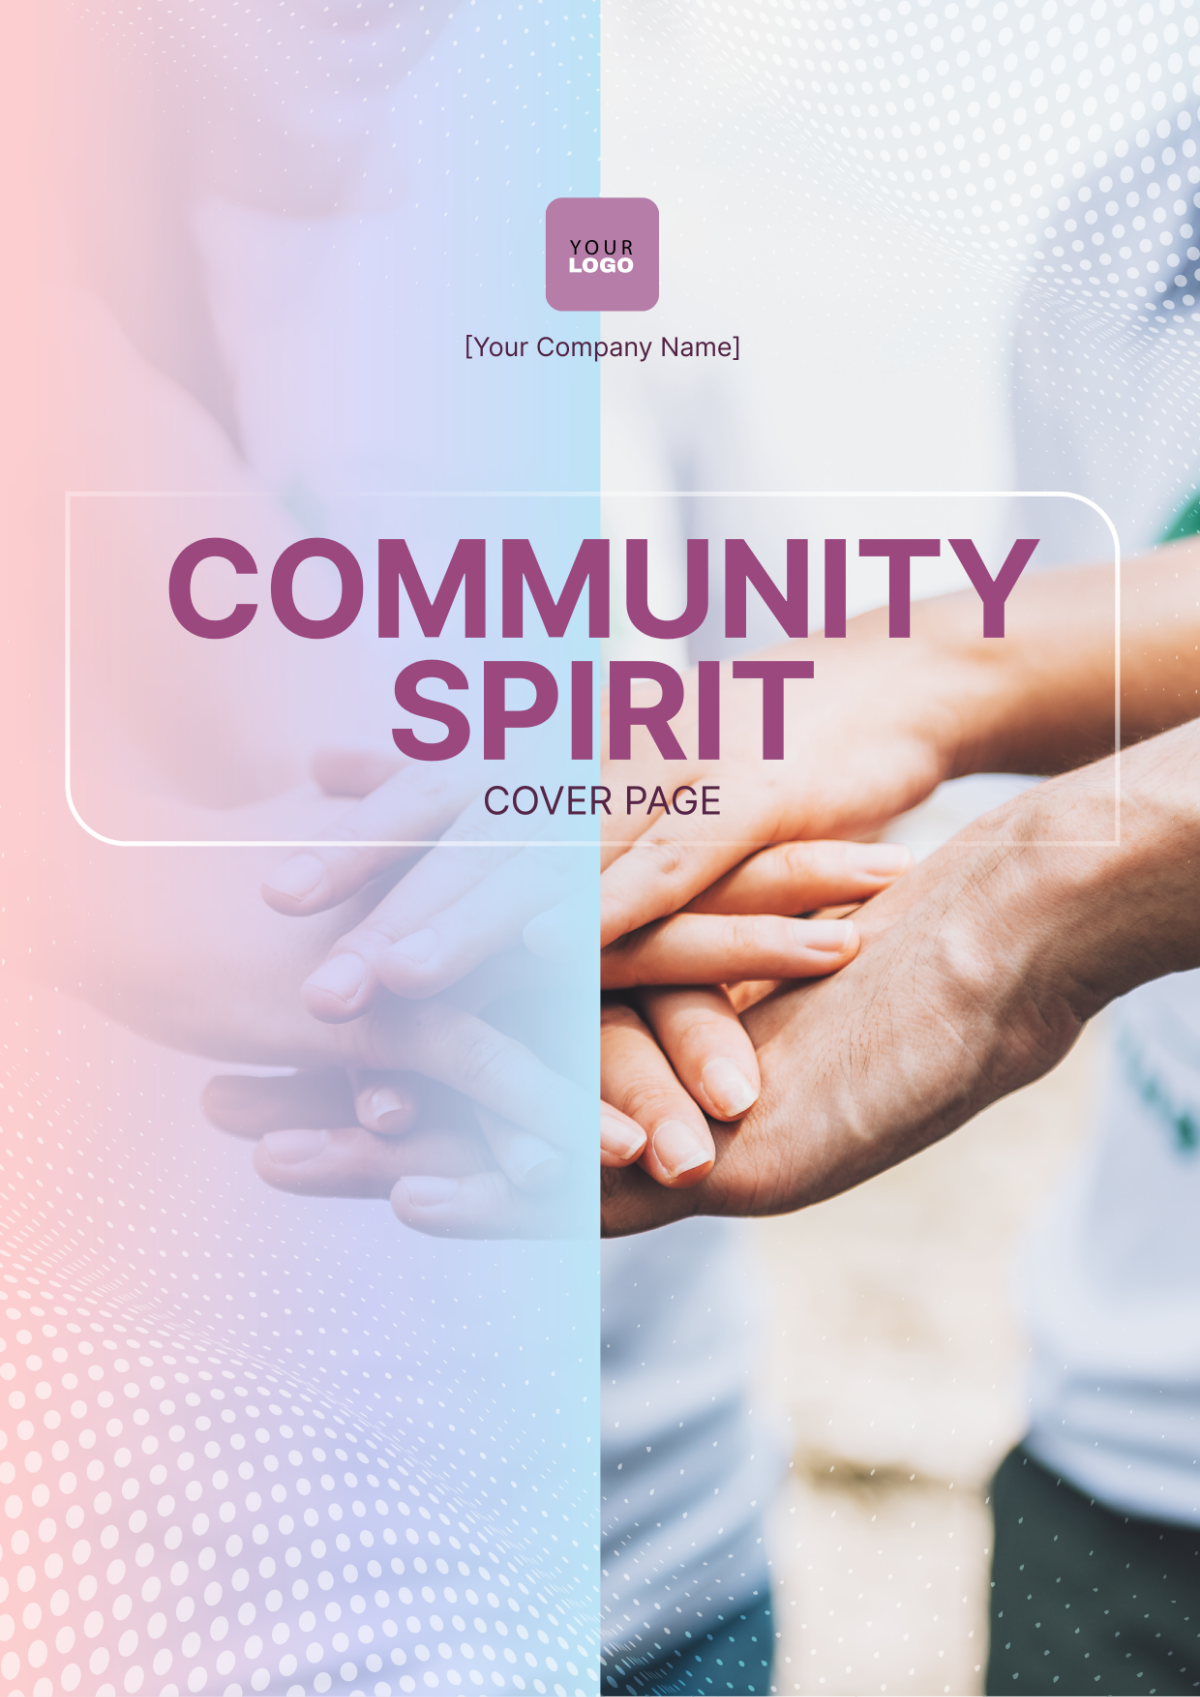 Community Spirit Cover Page Template